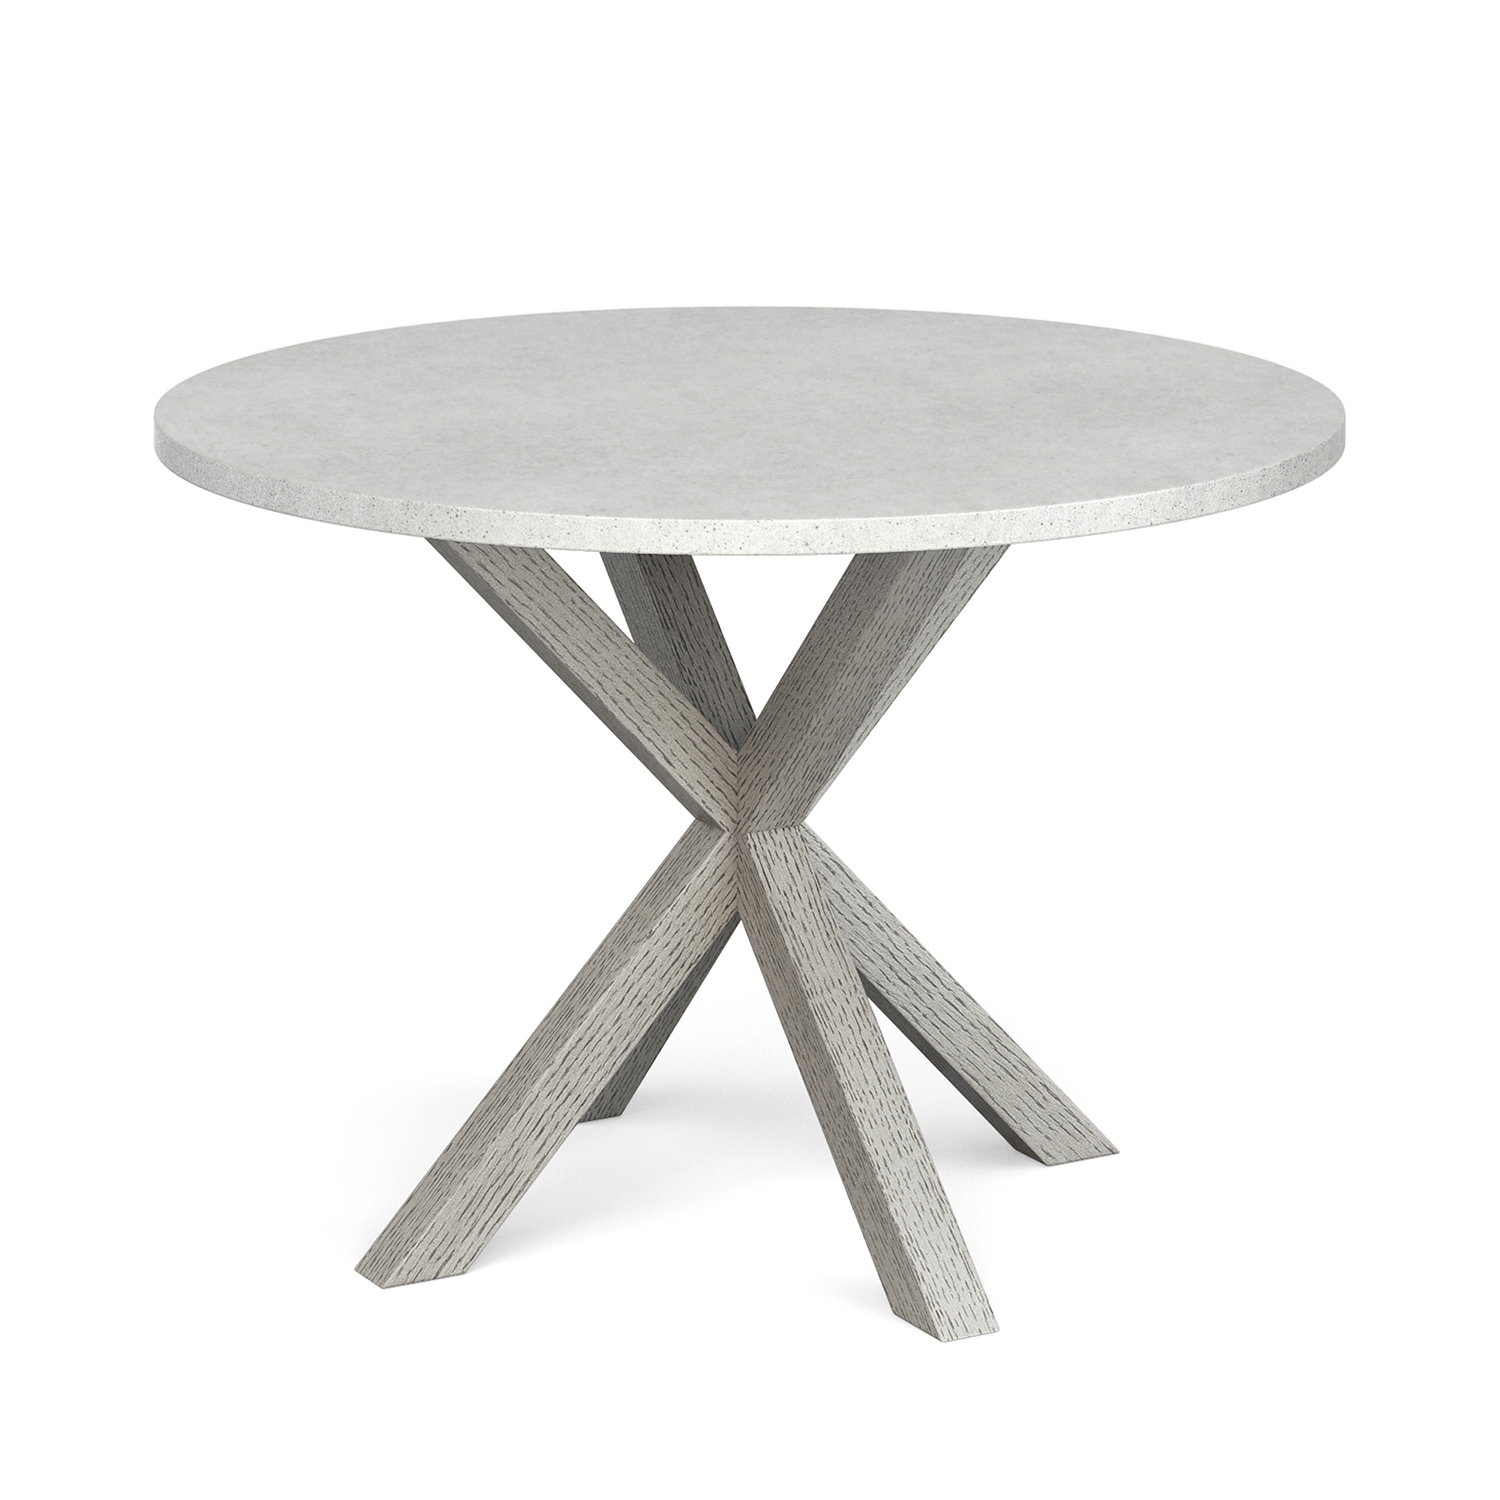 Harbour 110cm Round Dining Table